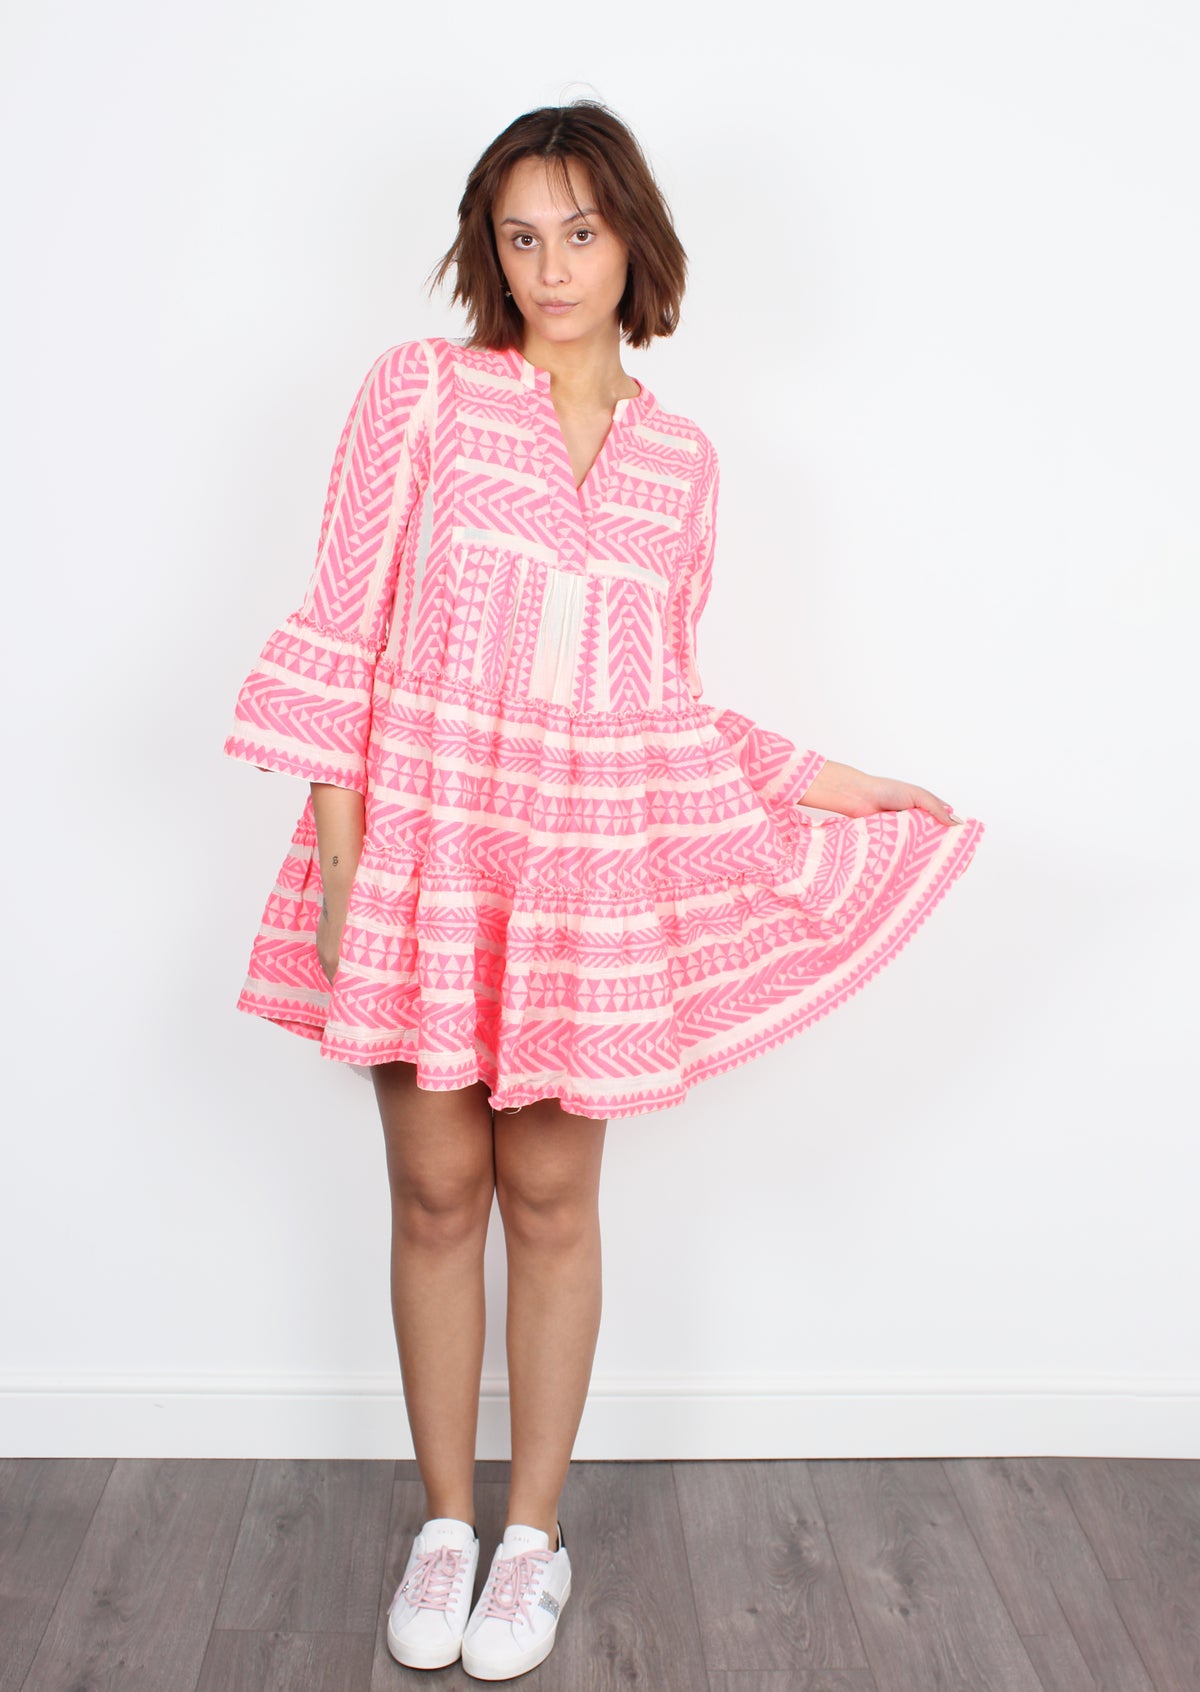 Ella Dress 193 in Neon Pink and Off White